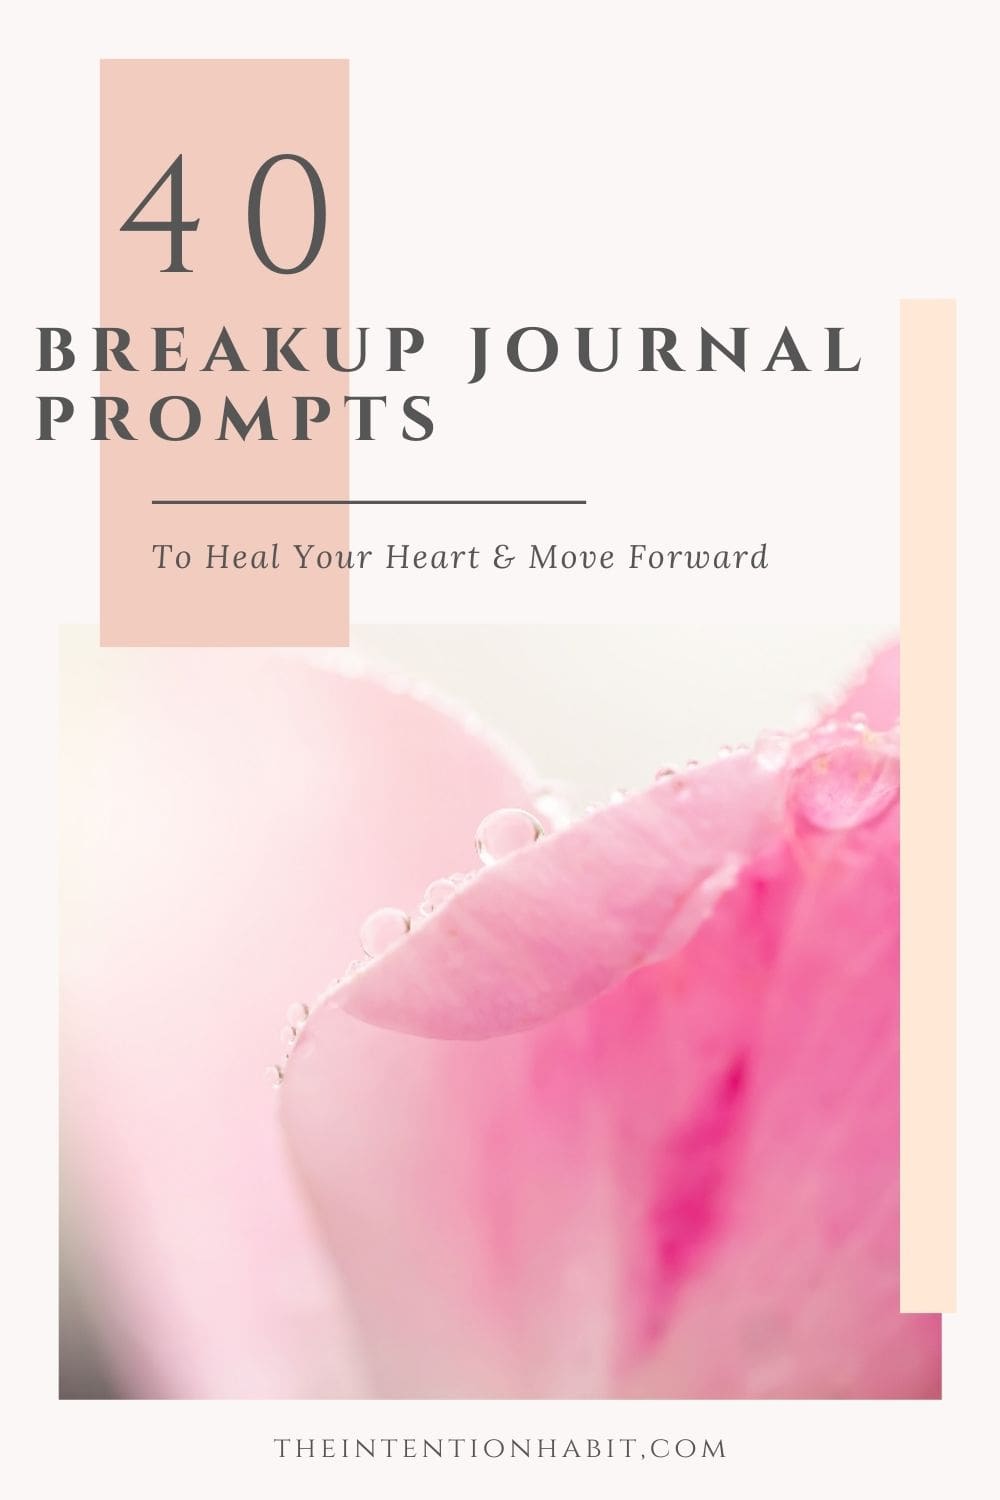 40 breakup journal prompts to help you move forward.